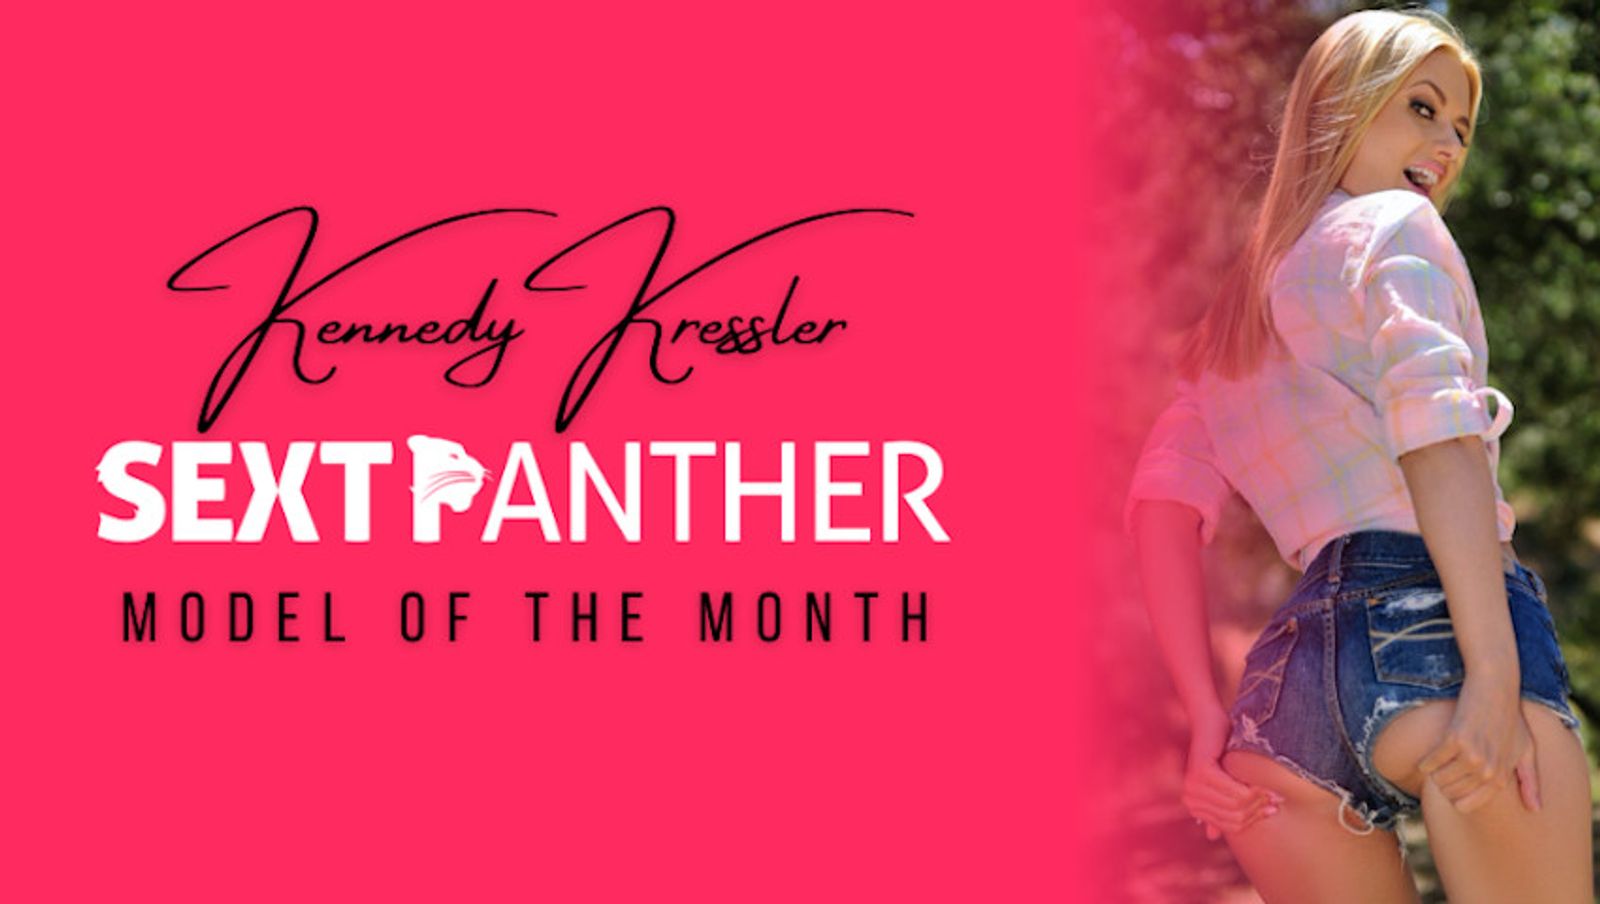 Kennedy Kressler Named SextPanther May Model of the Month